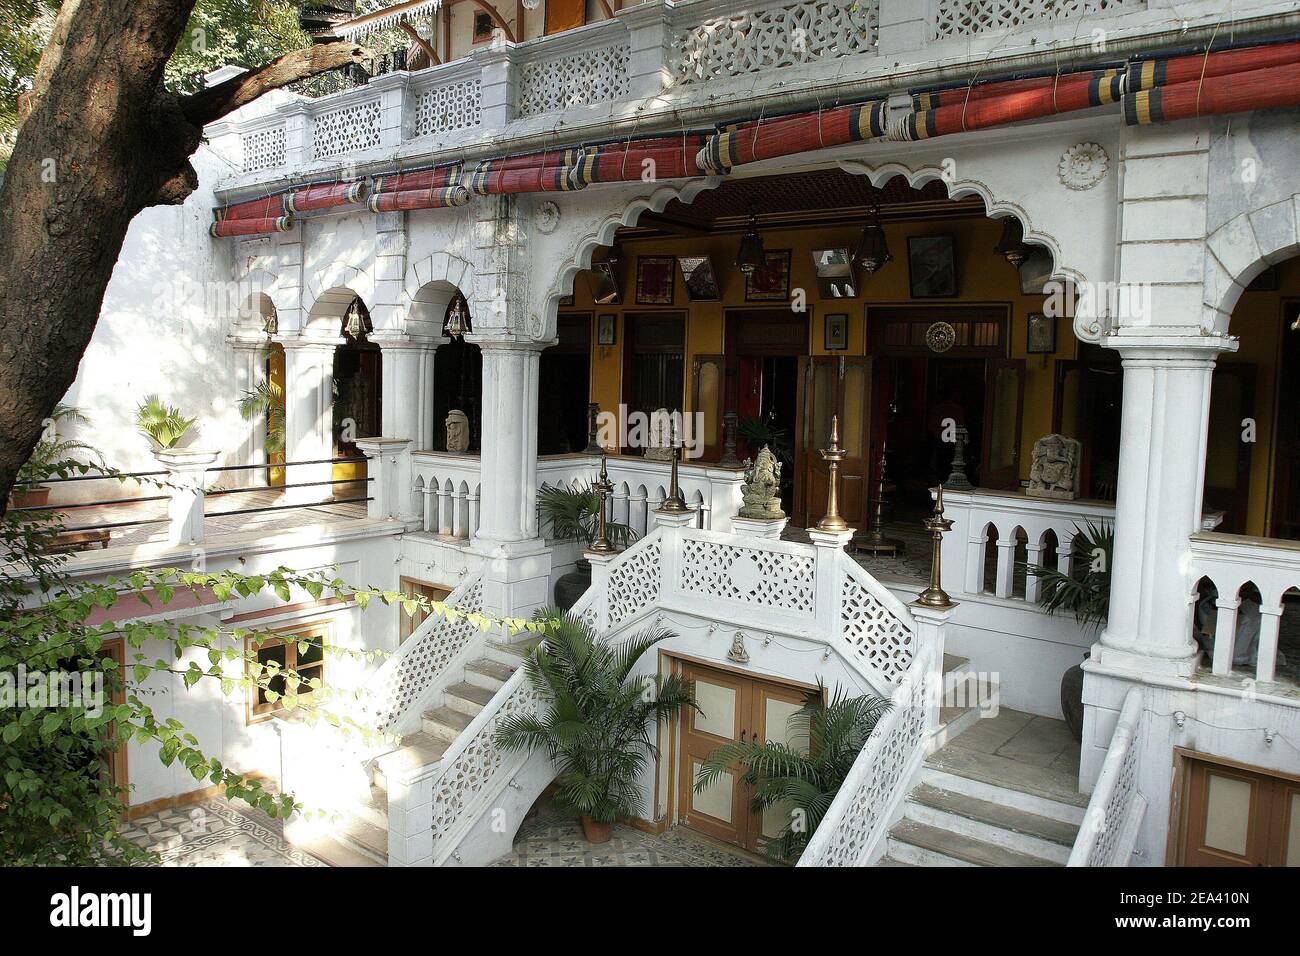 EXCLUSIVE. Outside view of the recently restored palace of Umang Hutheesing, Lord of Ahmedabad, in Ahmedabad, Gujarat State, India, in March 2005. Photo by Alexis Orand/ABACA. Stock Photo